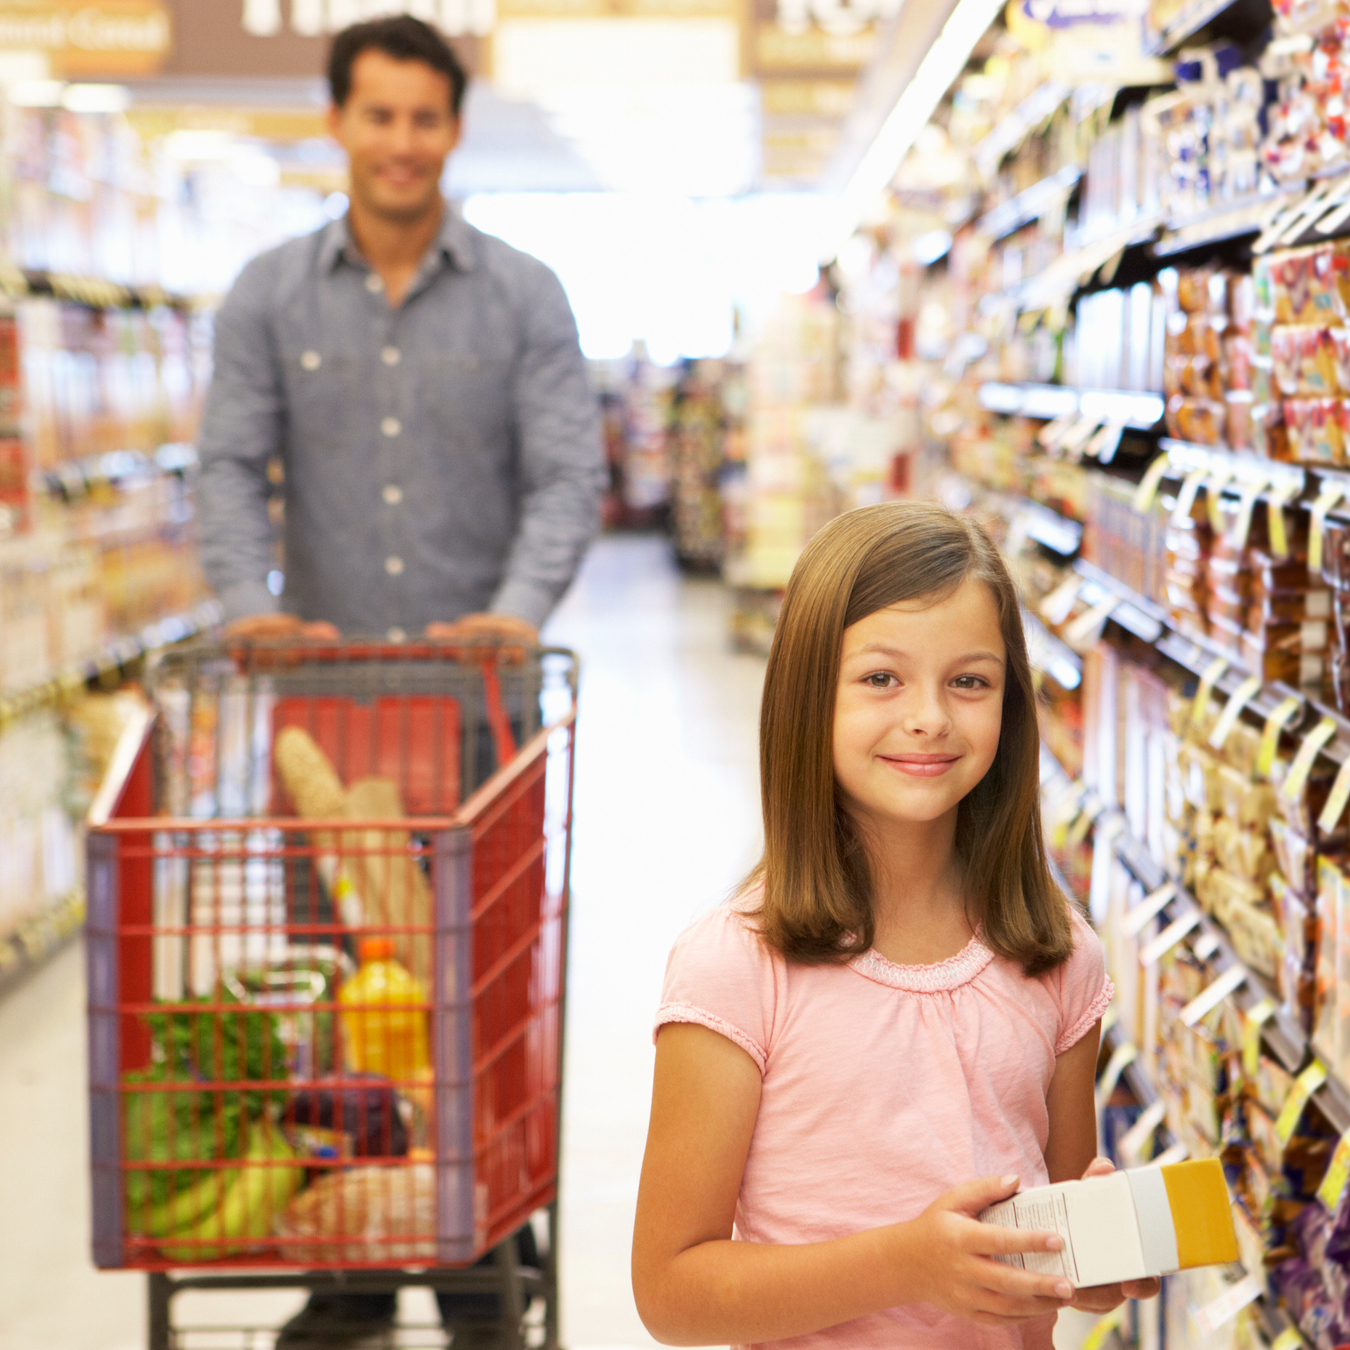 Male-presenting adult in background with female-presenting child in foreground at the grocery store. Adult is pushing a red cart filled with produce while the child smiles at the camera